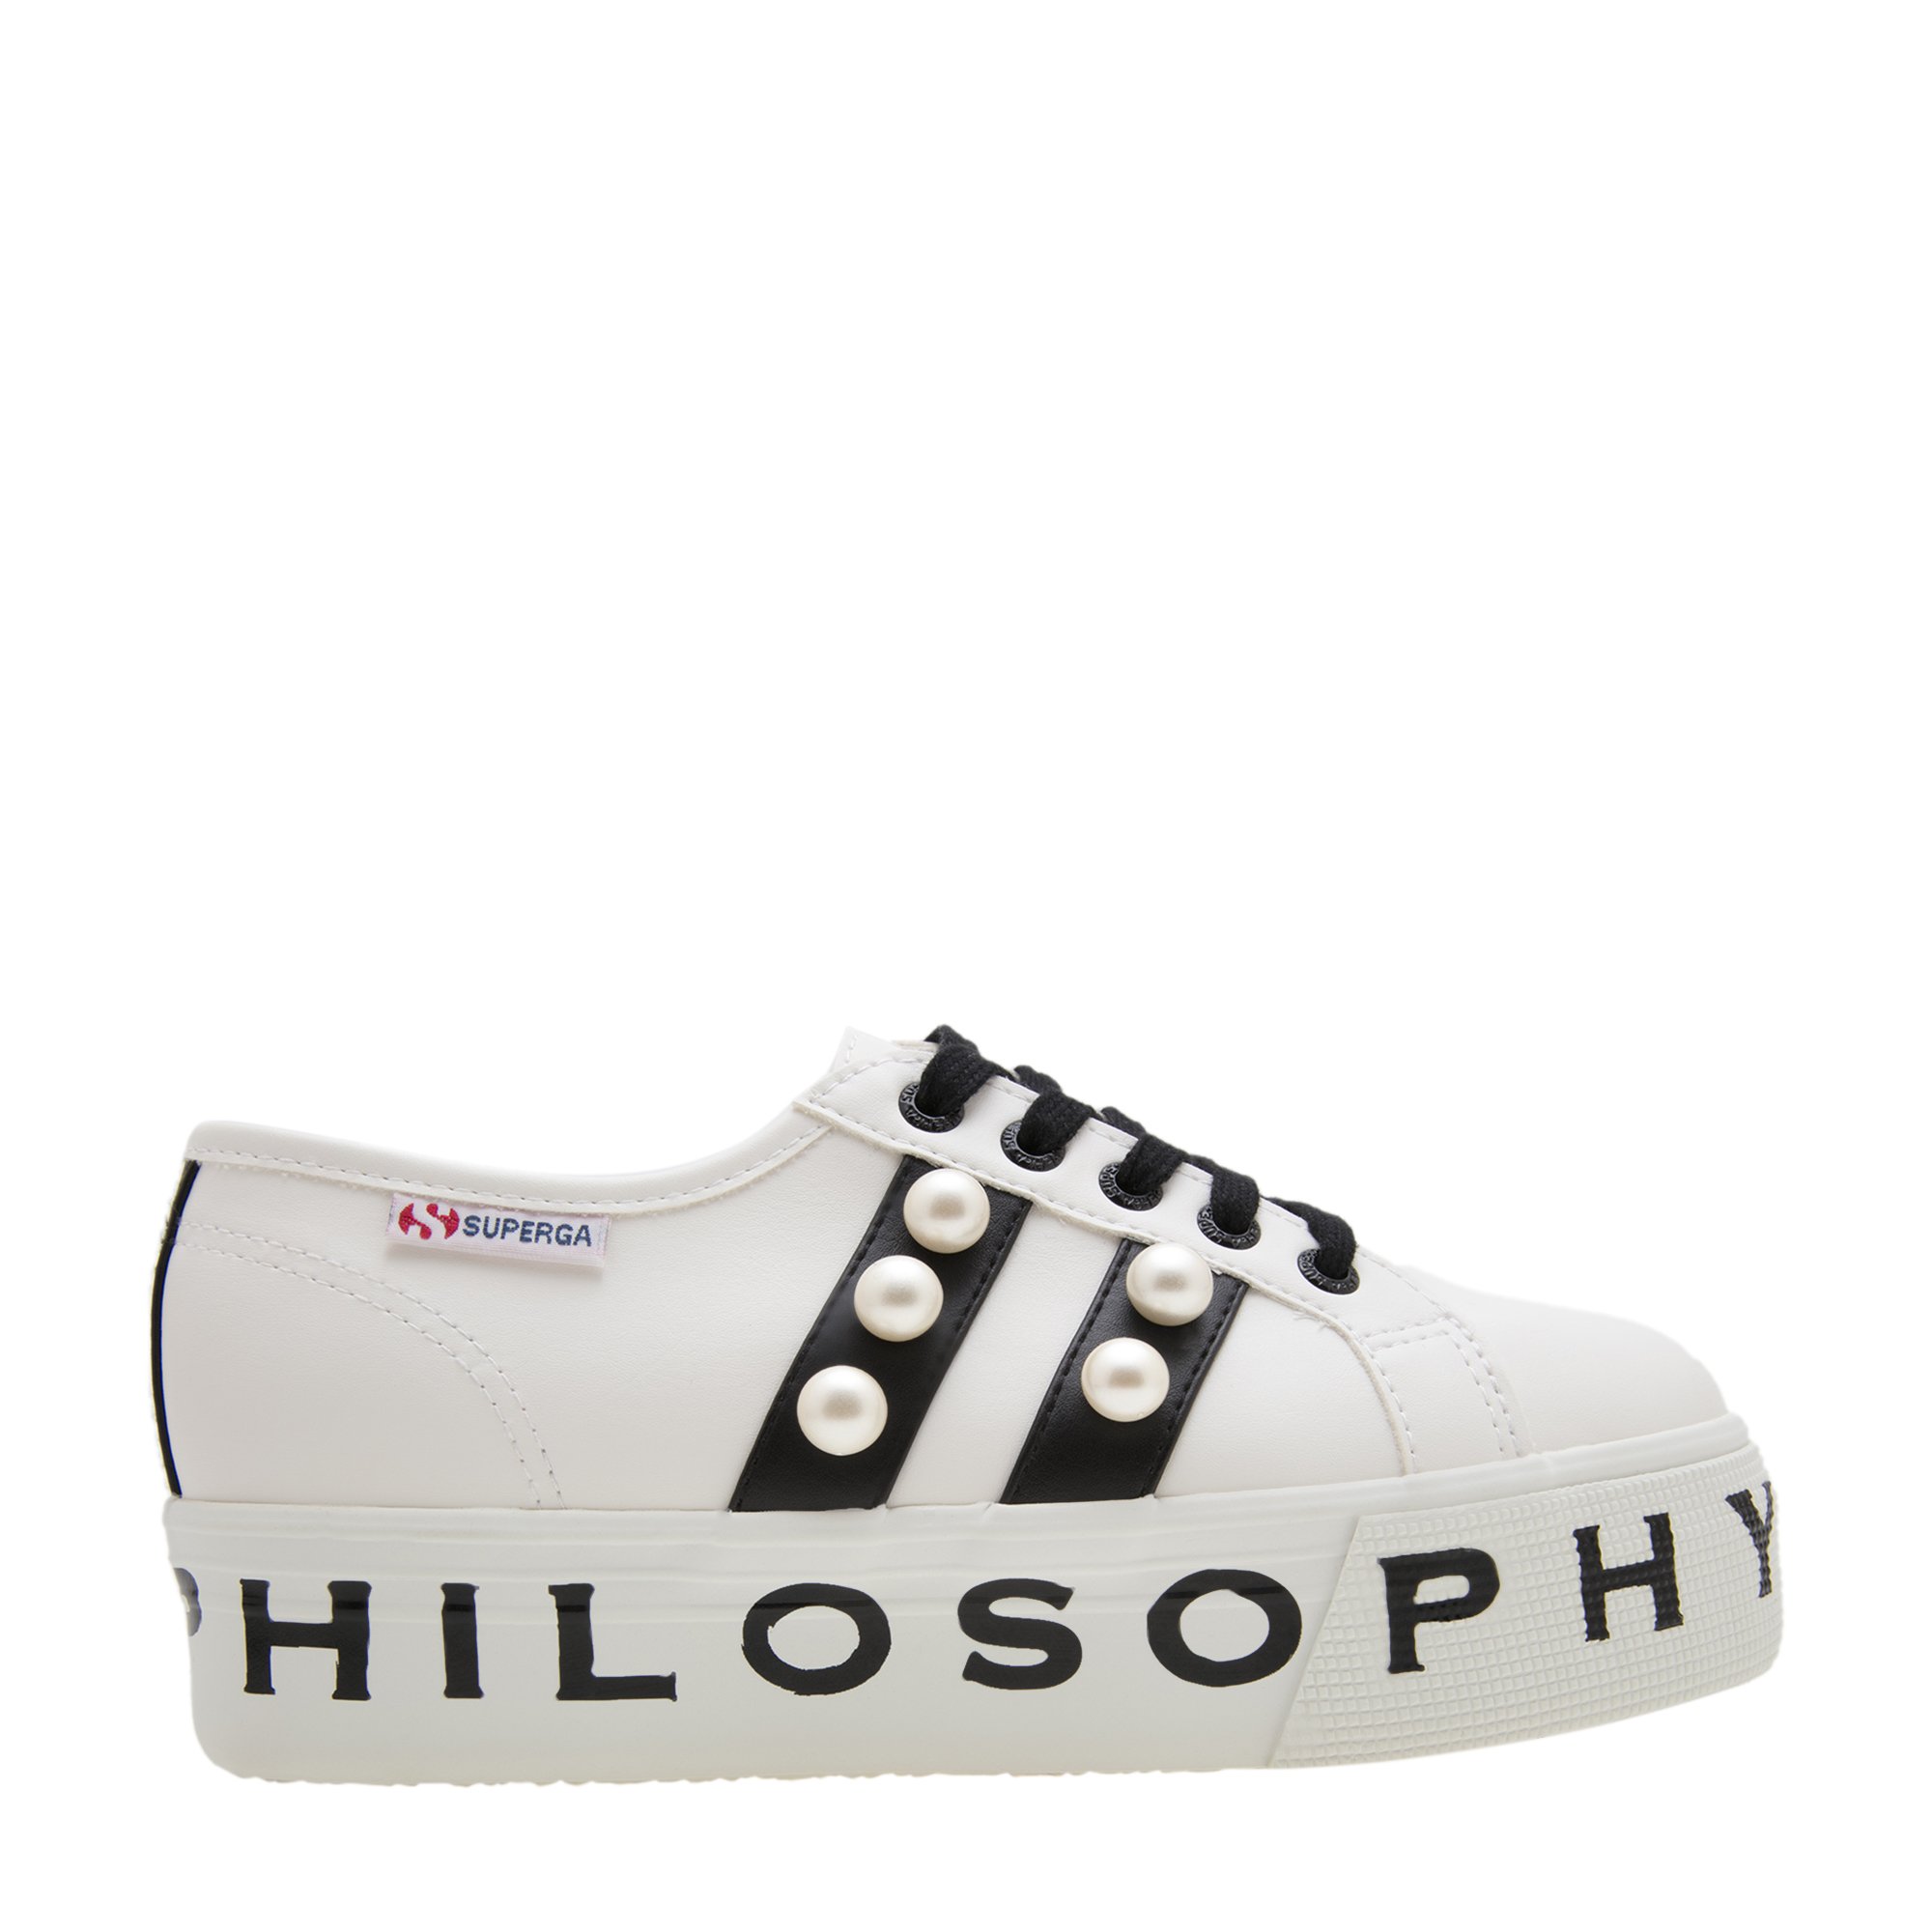 X Philosophy leather sneakers.